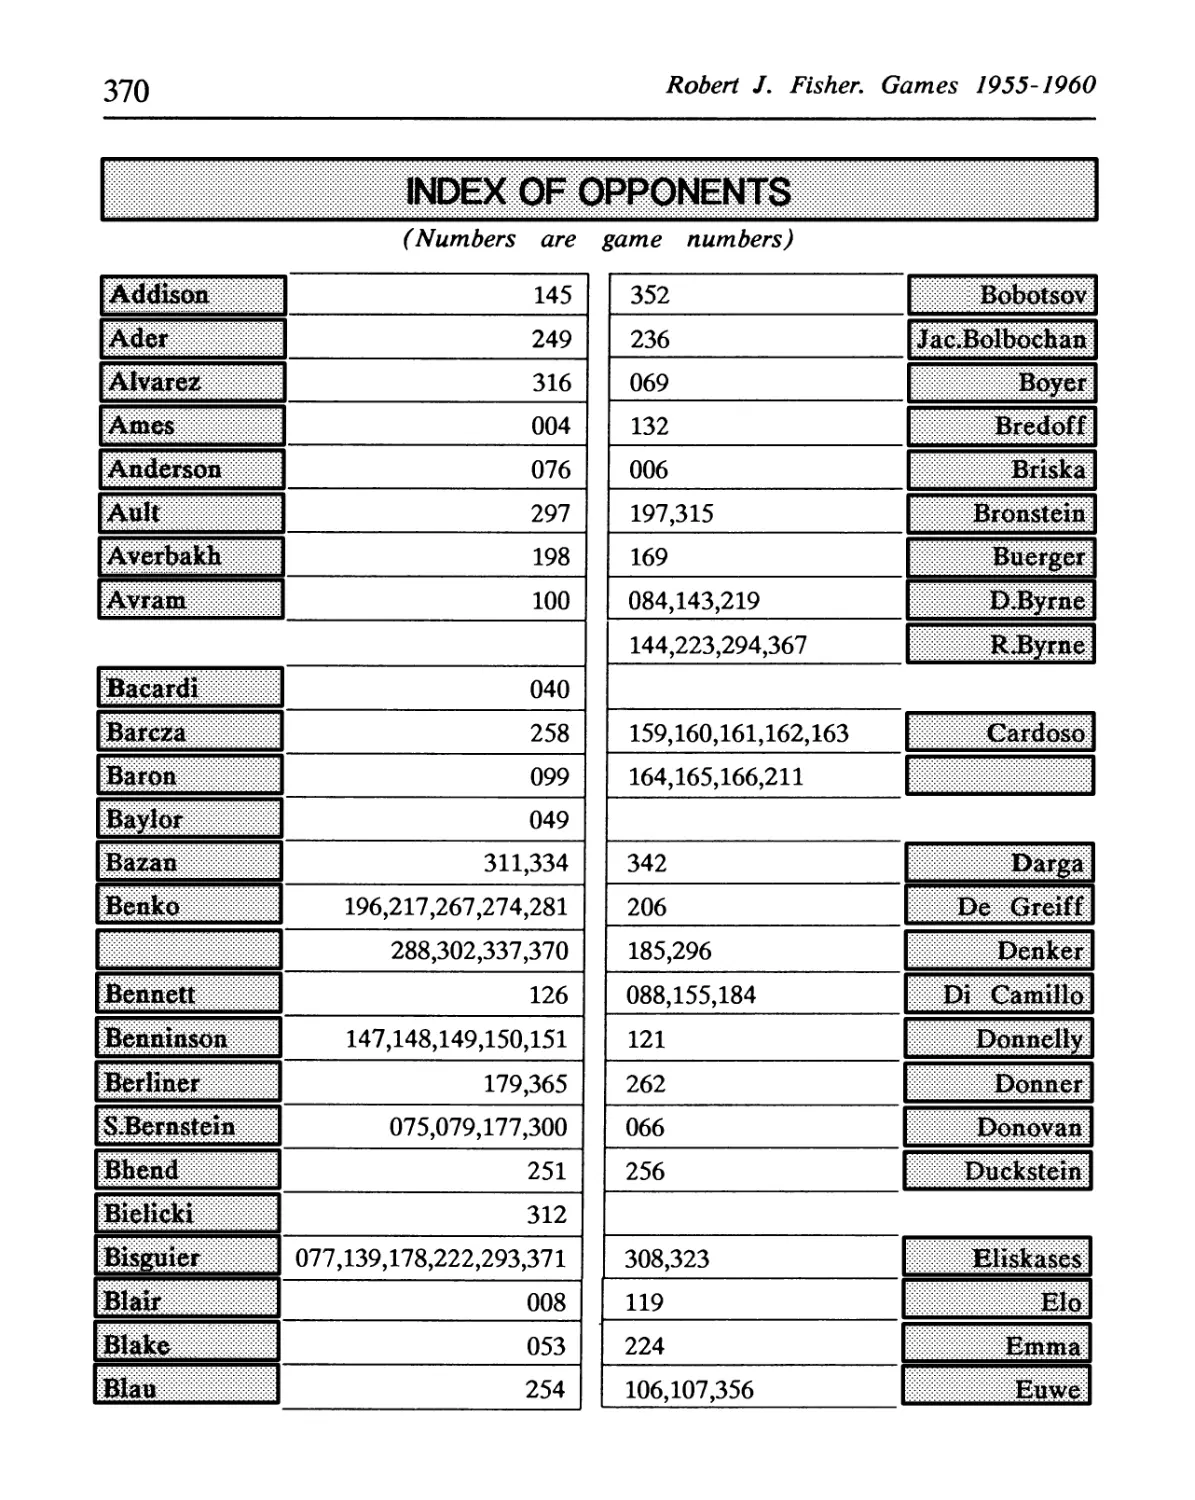 Index of Opponents